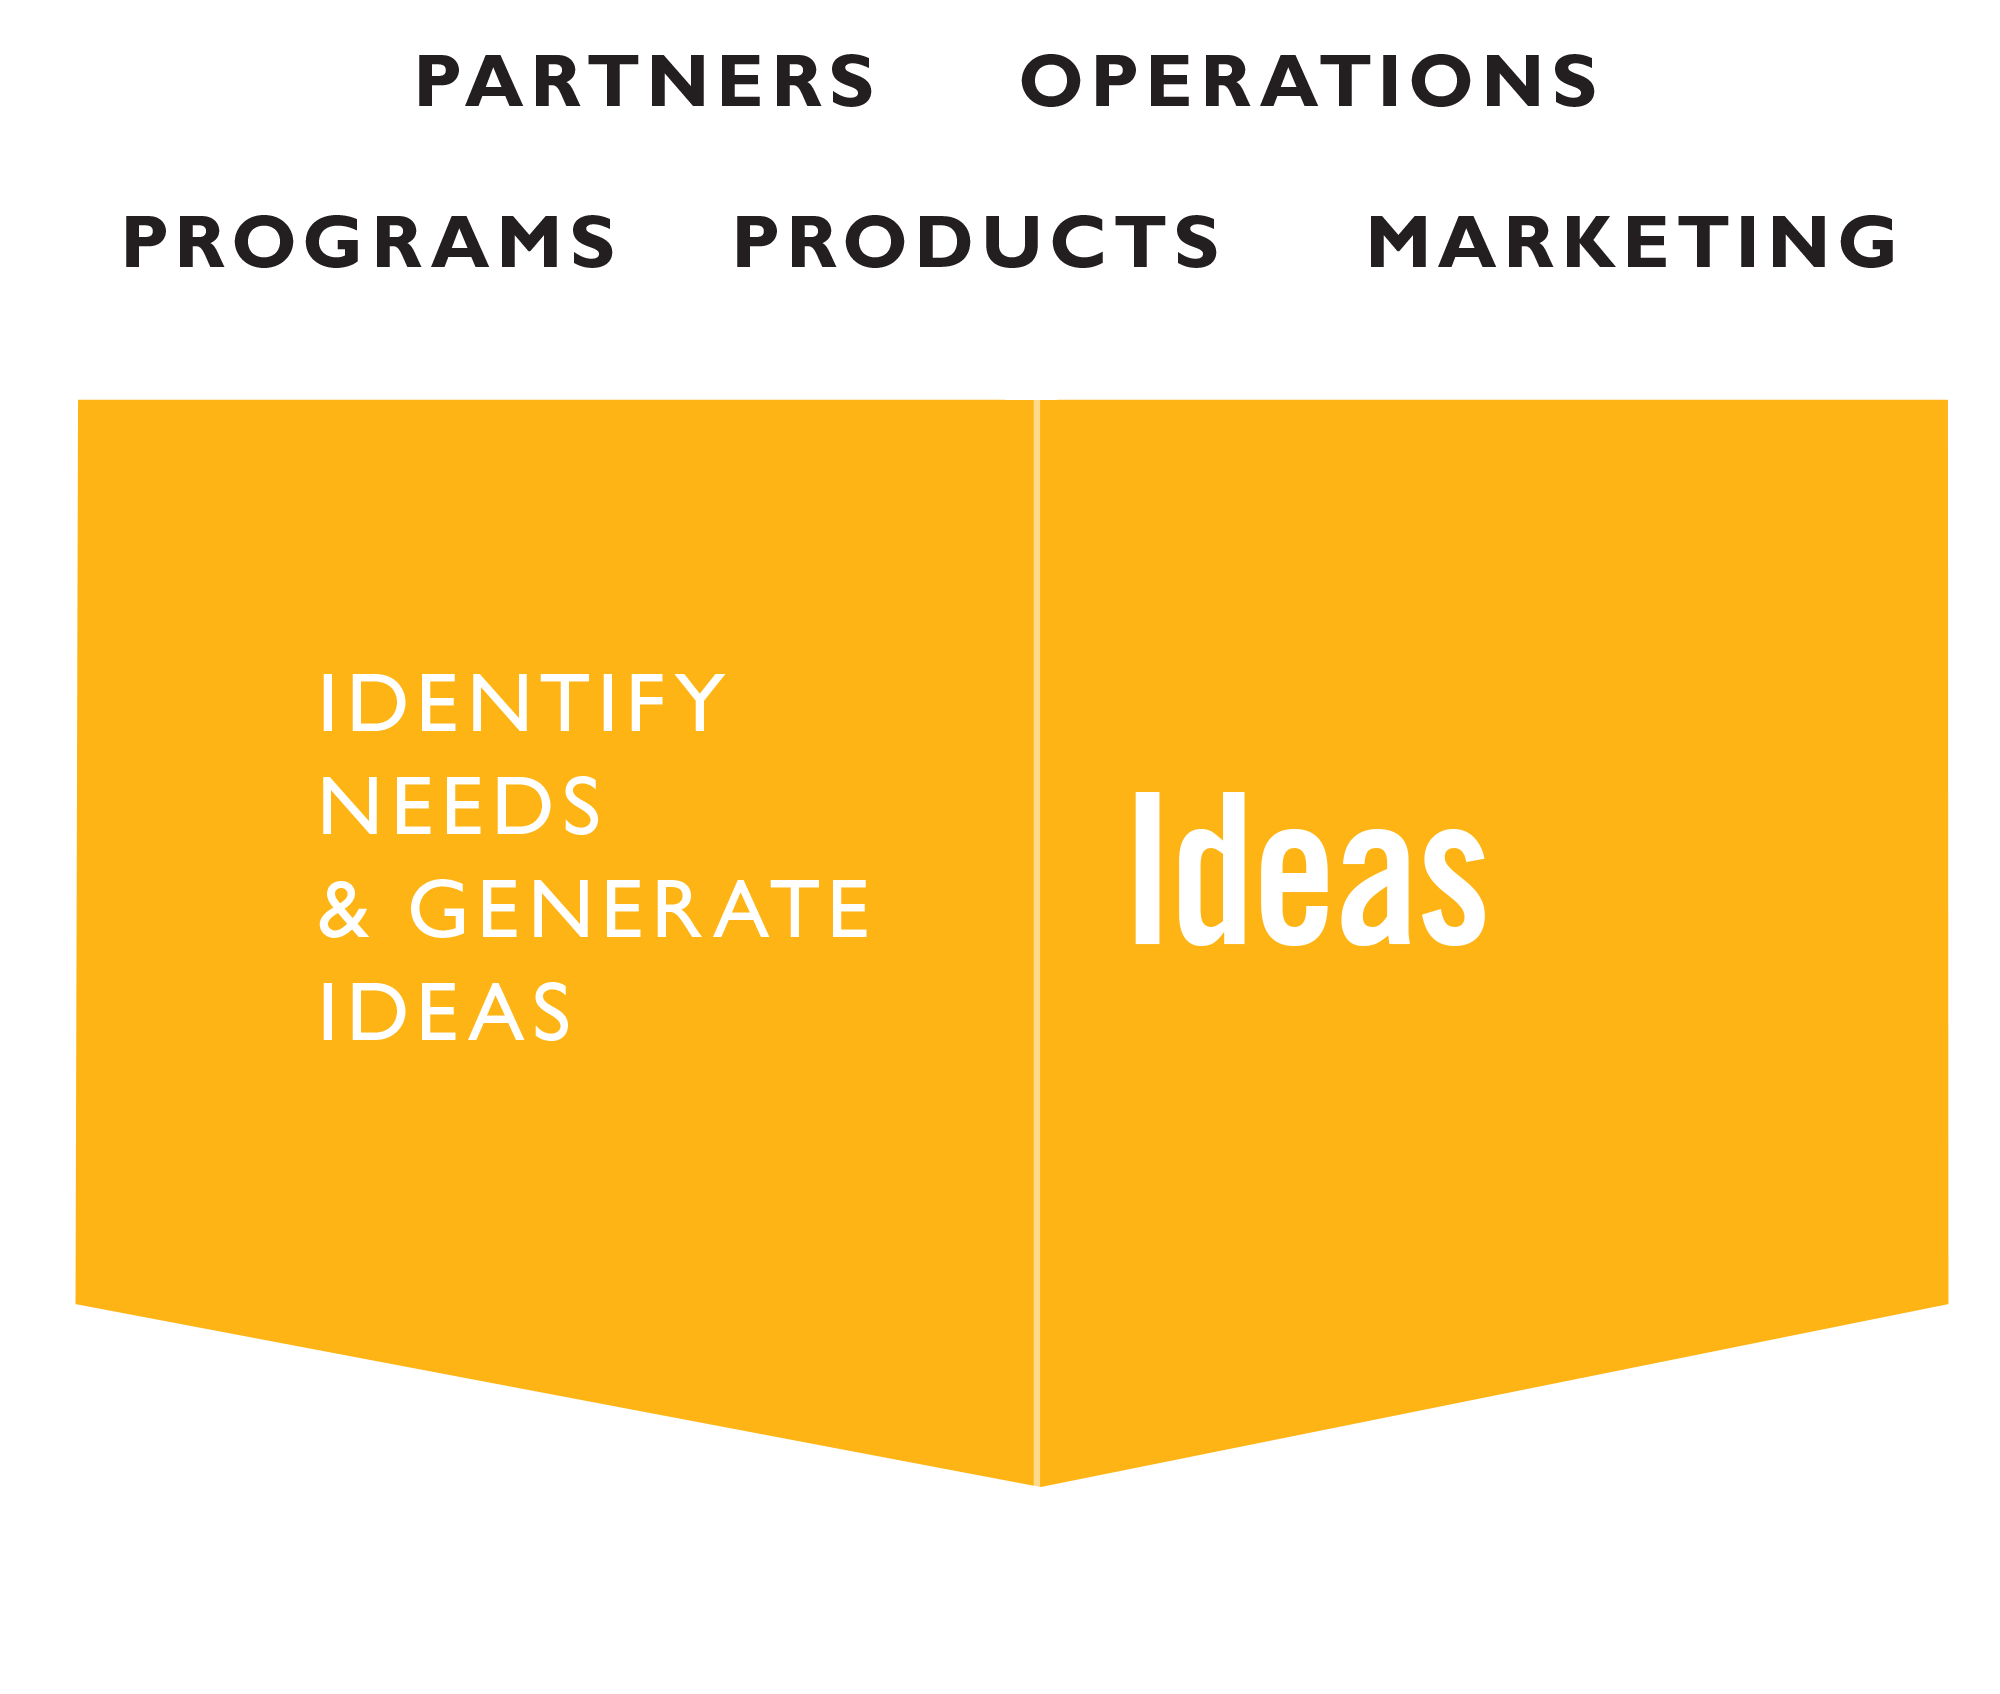 Ideation gate: Partners, operations, programs, products, marketing come together to identify needs and generate ideas to best meet the unmet needs of children. 